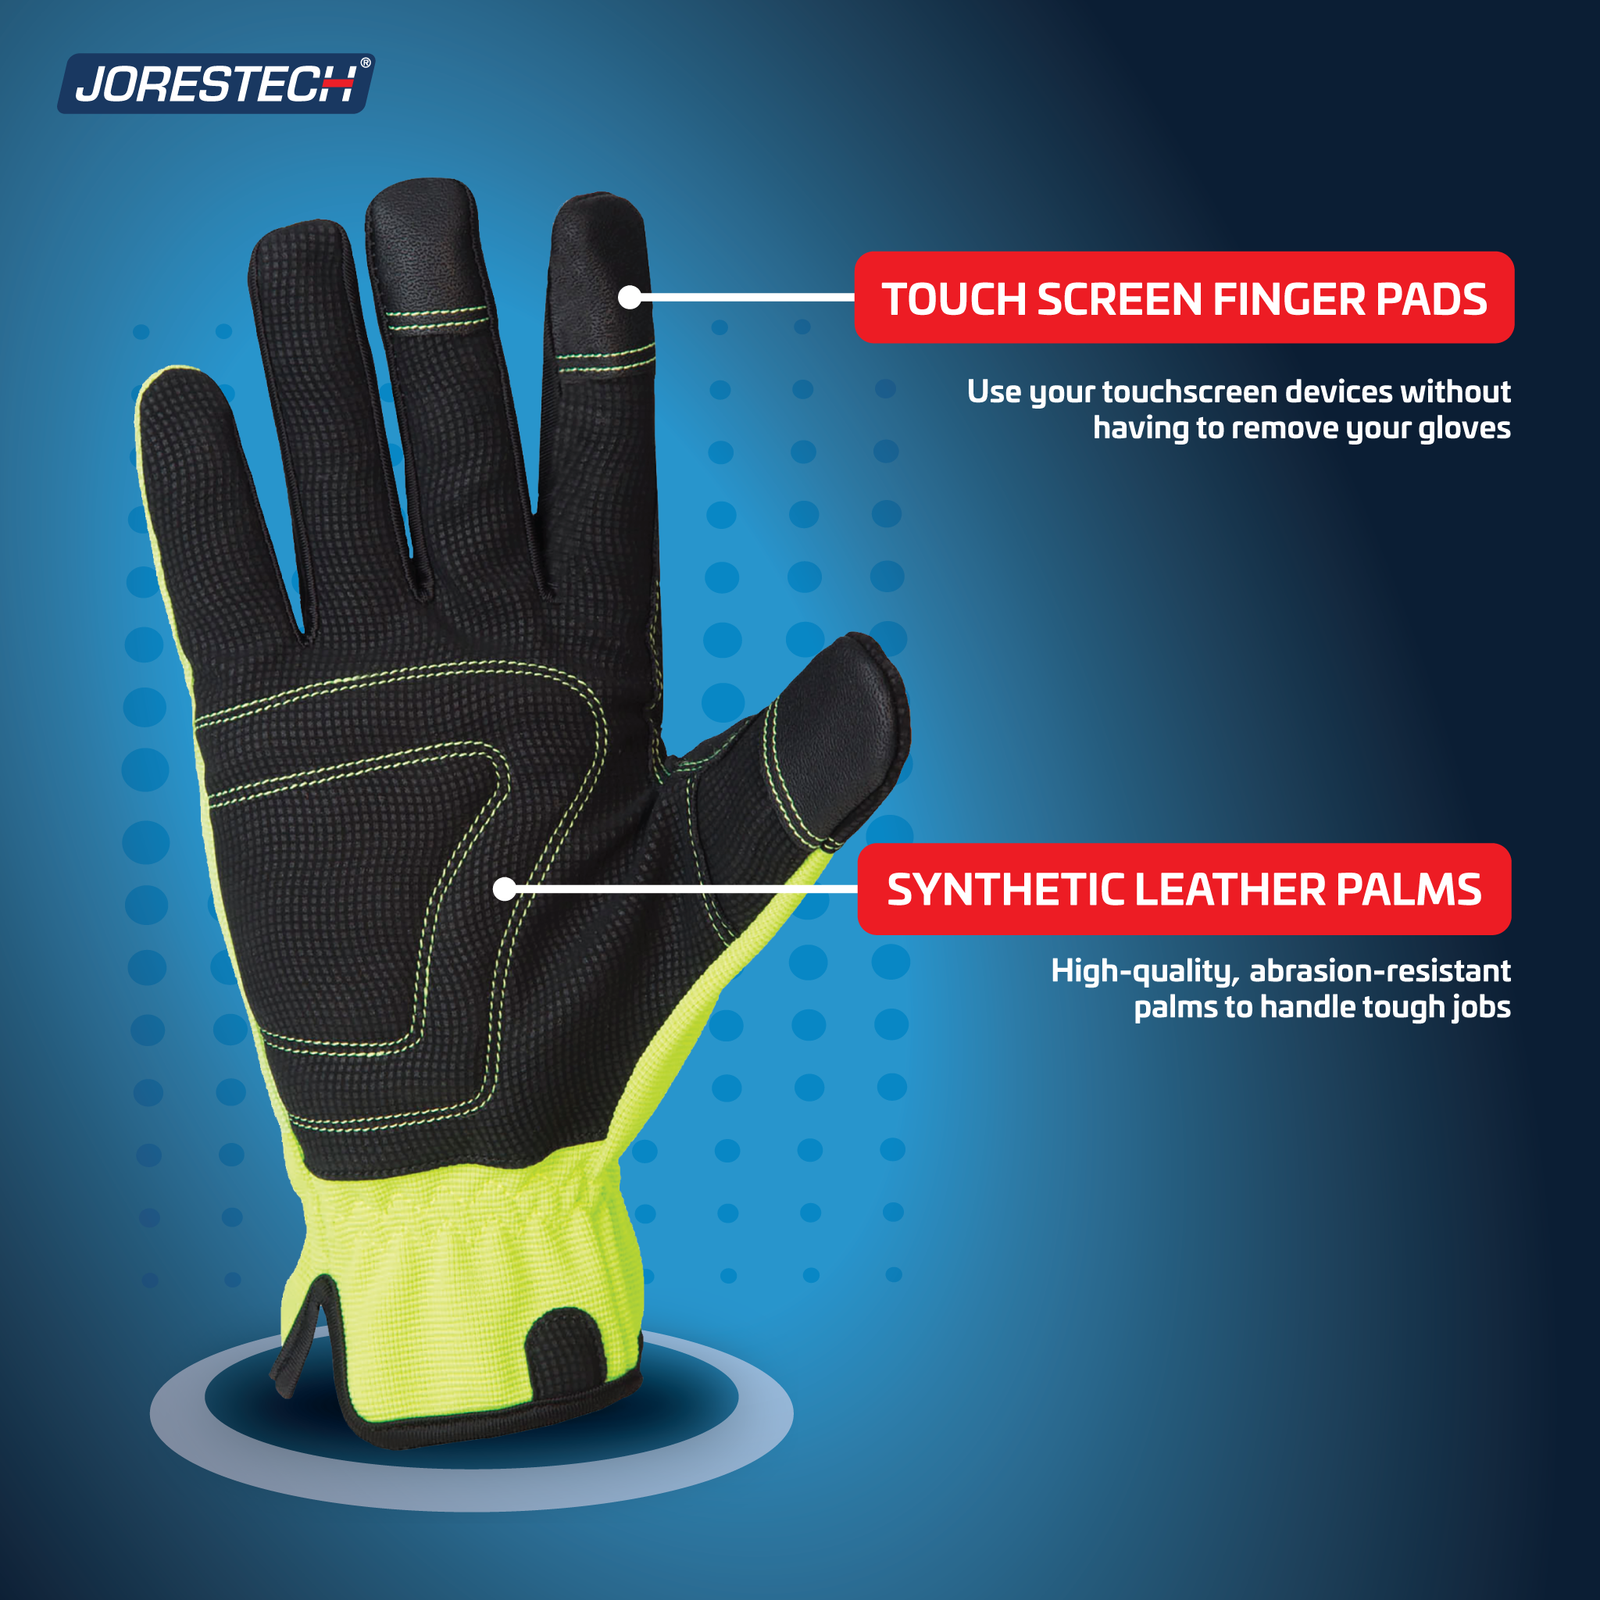 Hi vis work glove showing touchscreen finger pads and synthetic leather palms